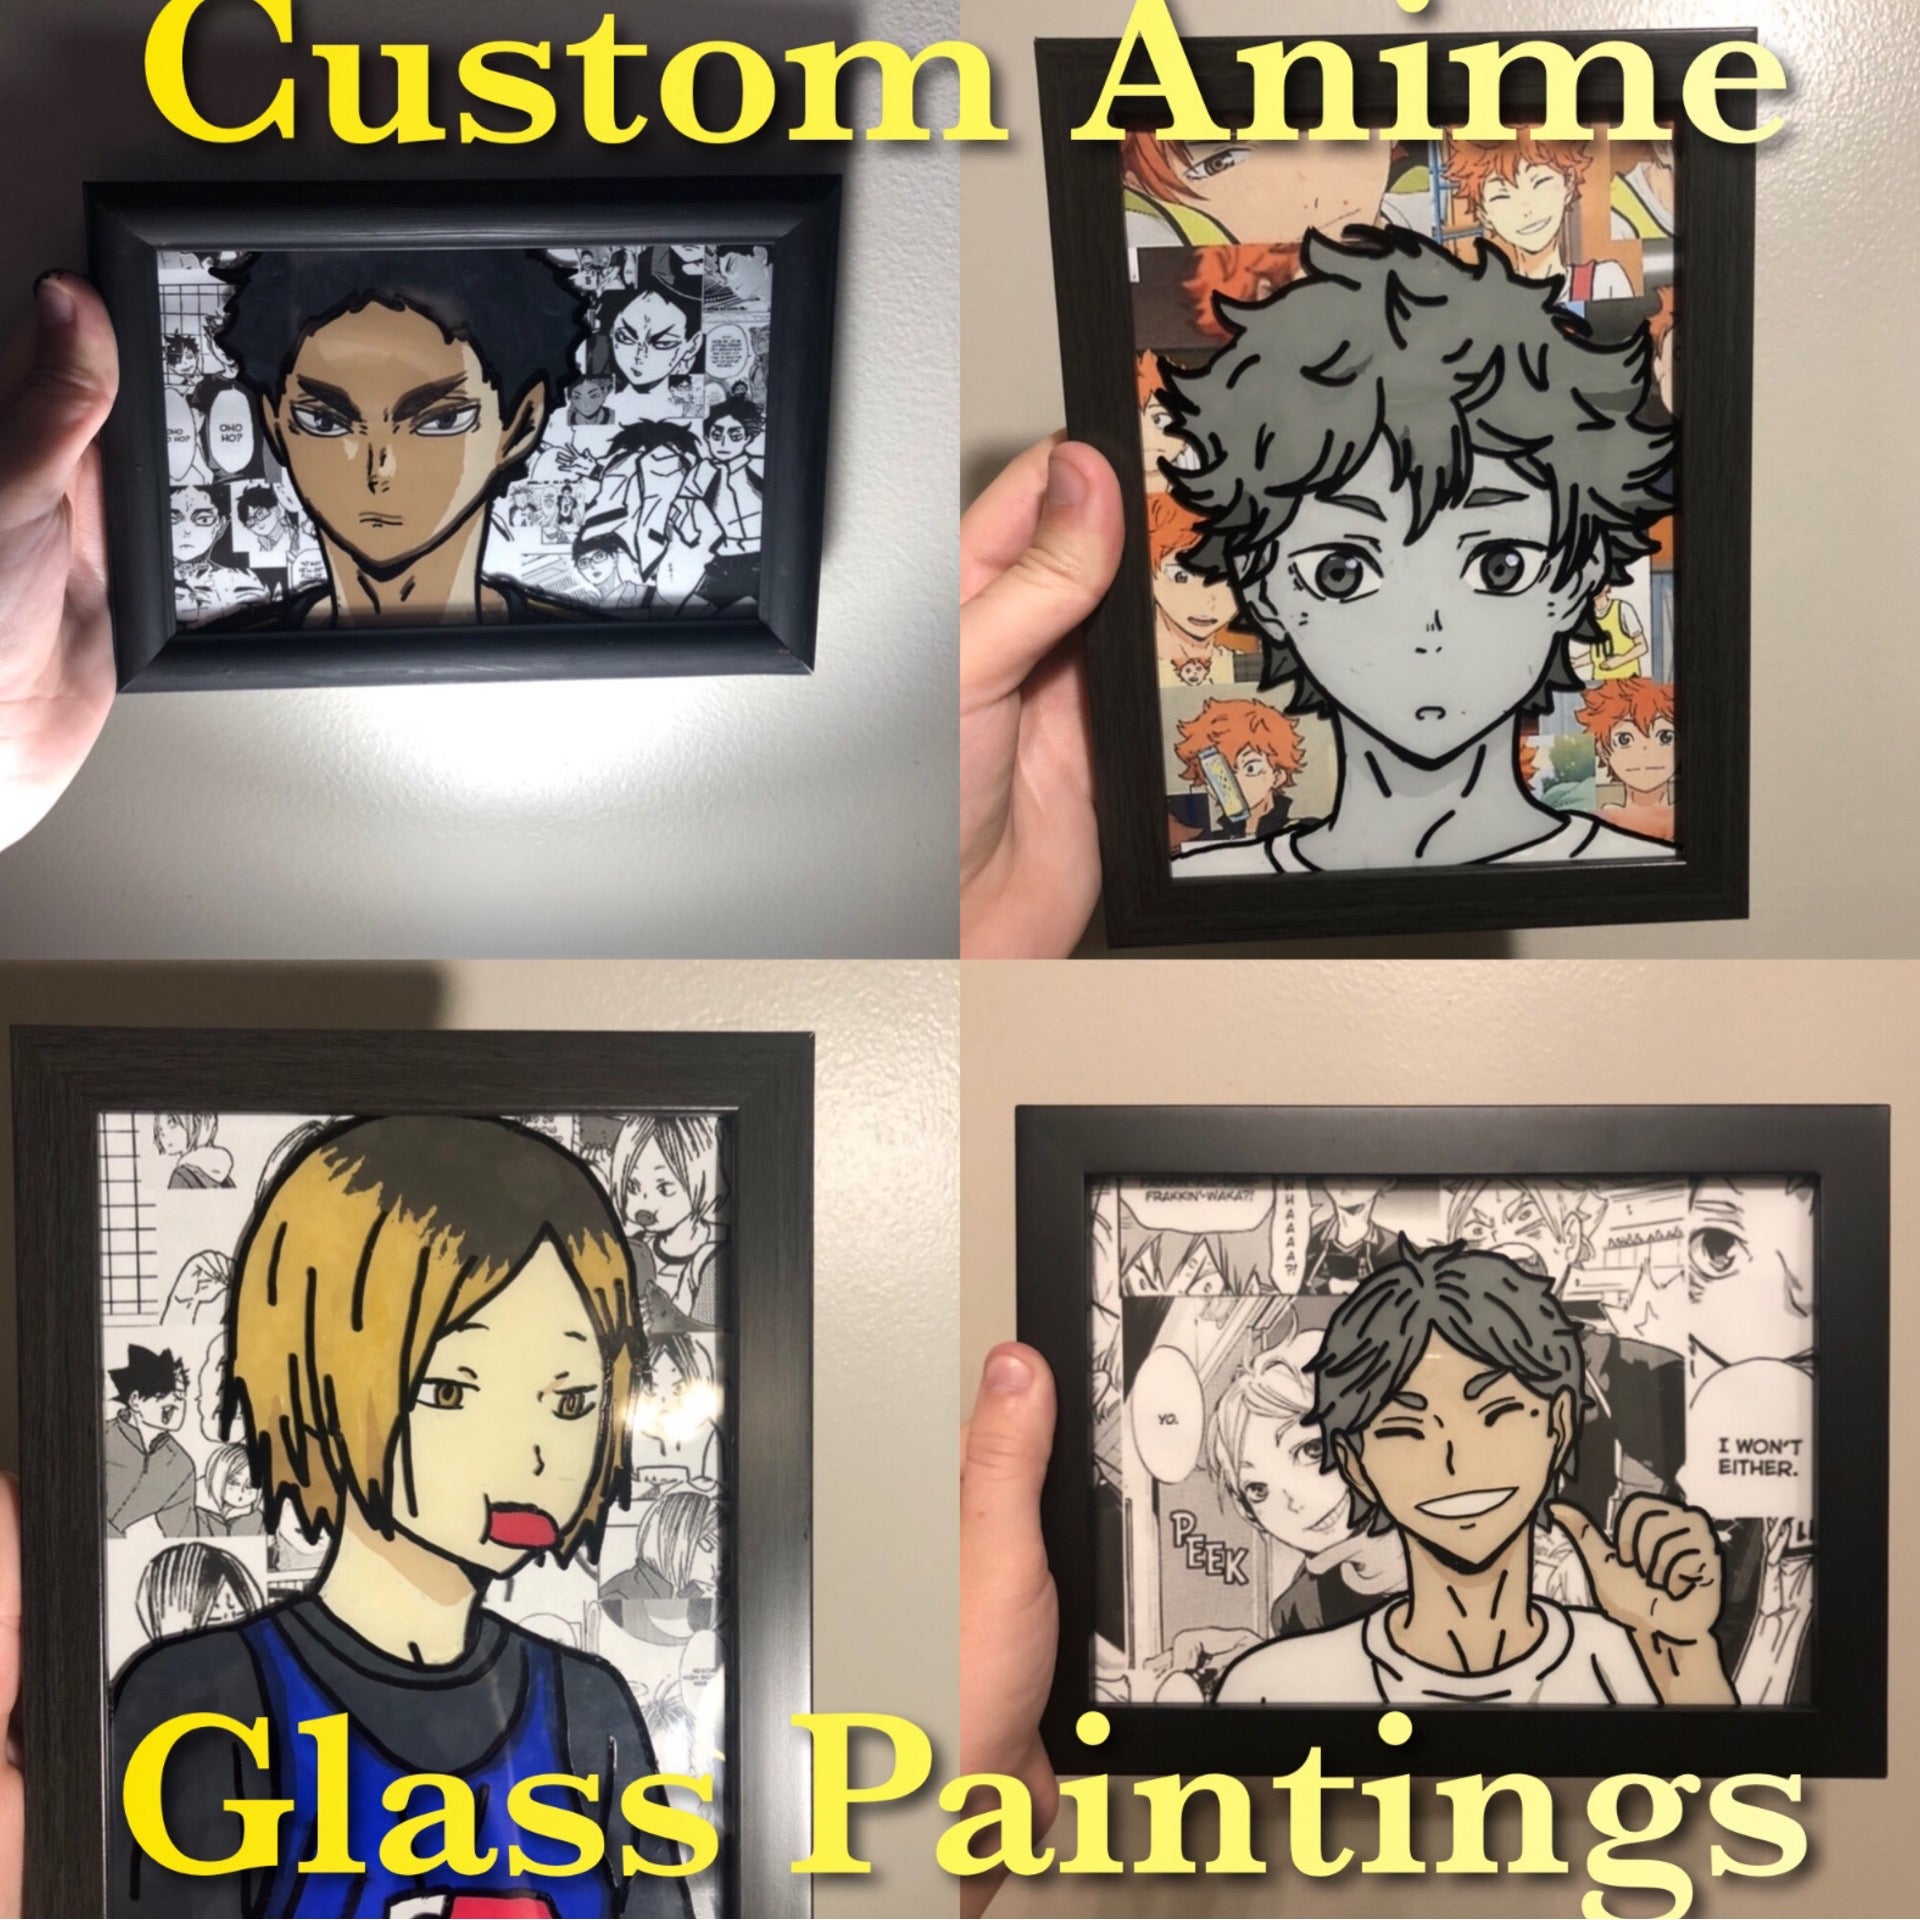 Glass painting on Pinterest